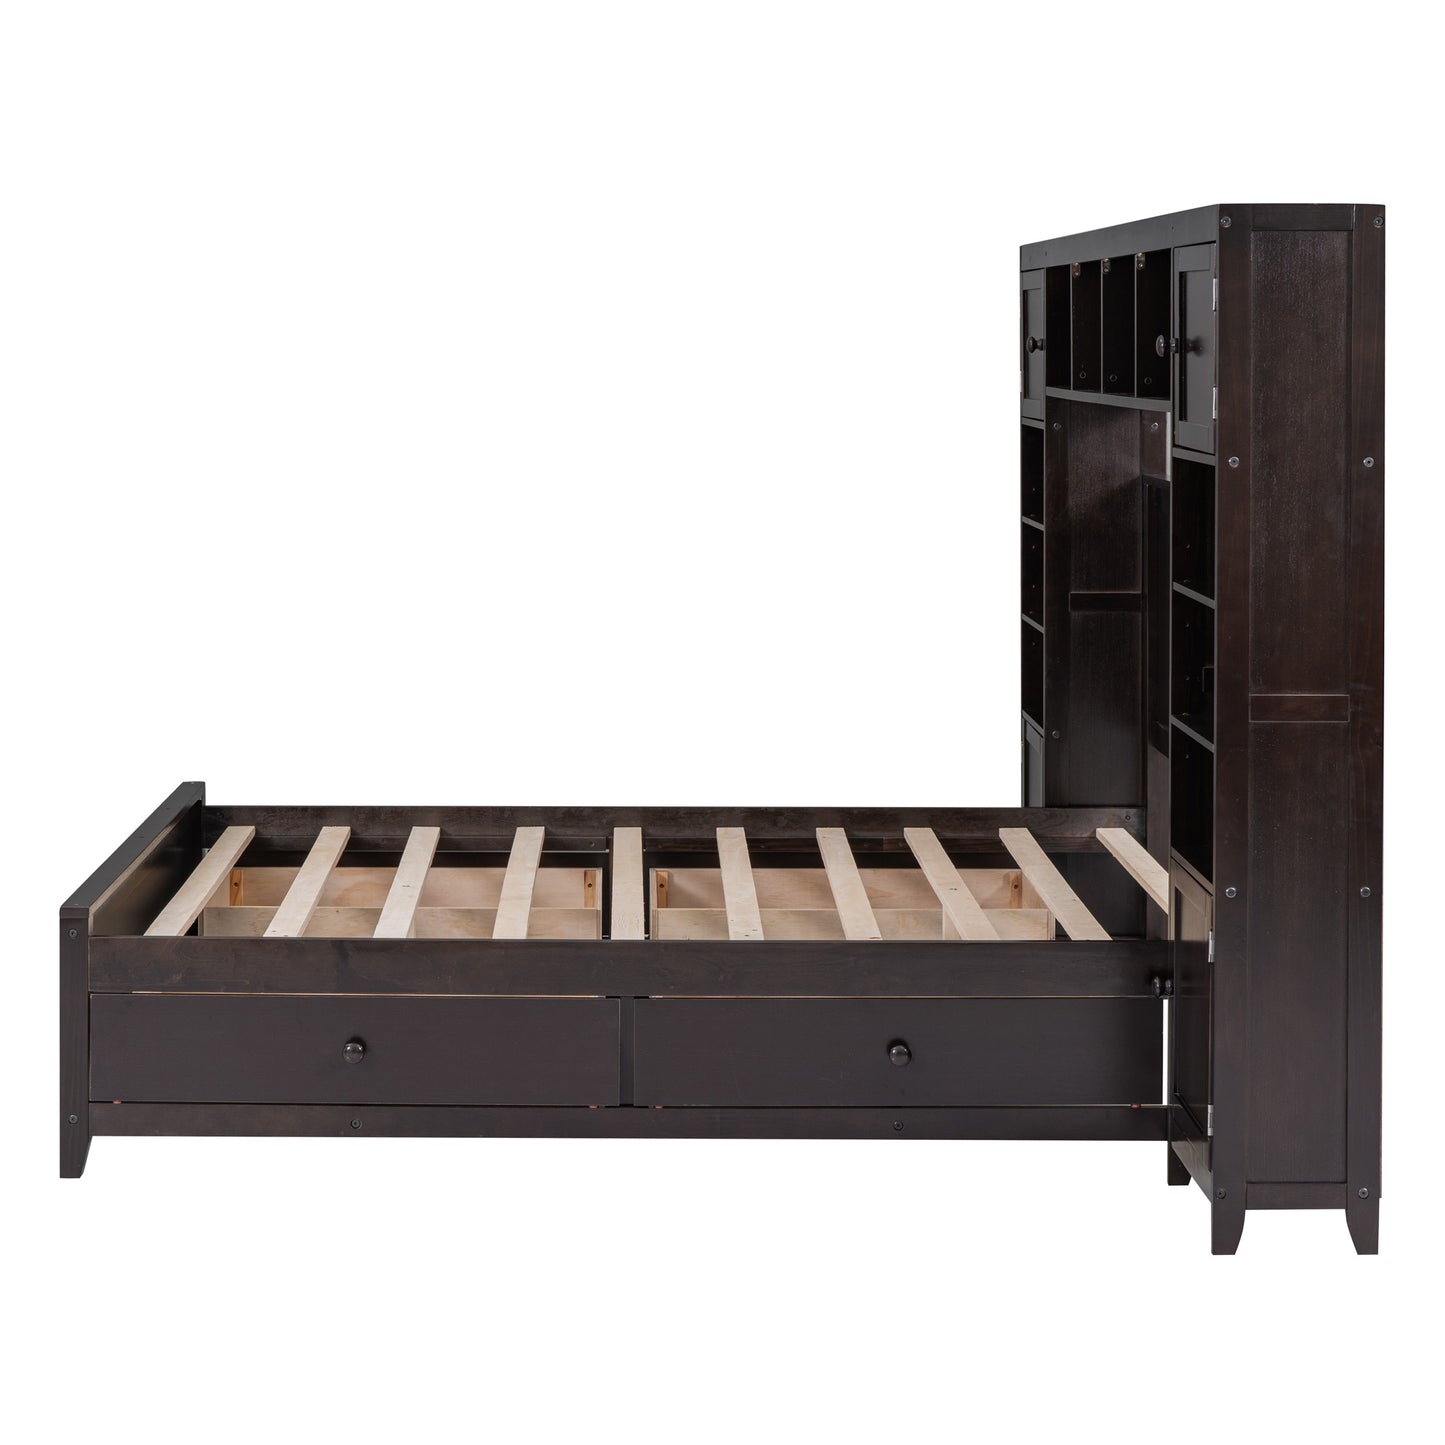 wooden bed with all-in-one cabinet and shelf